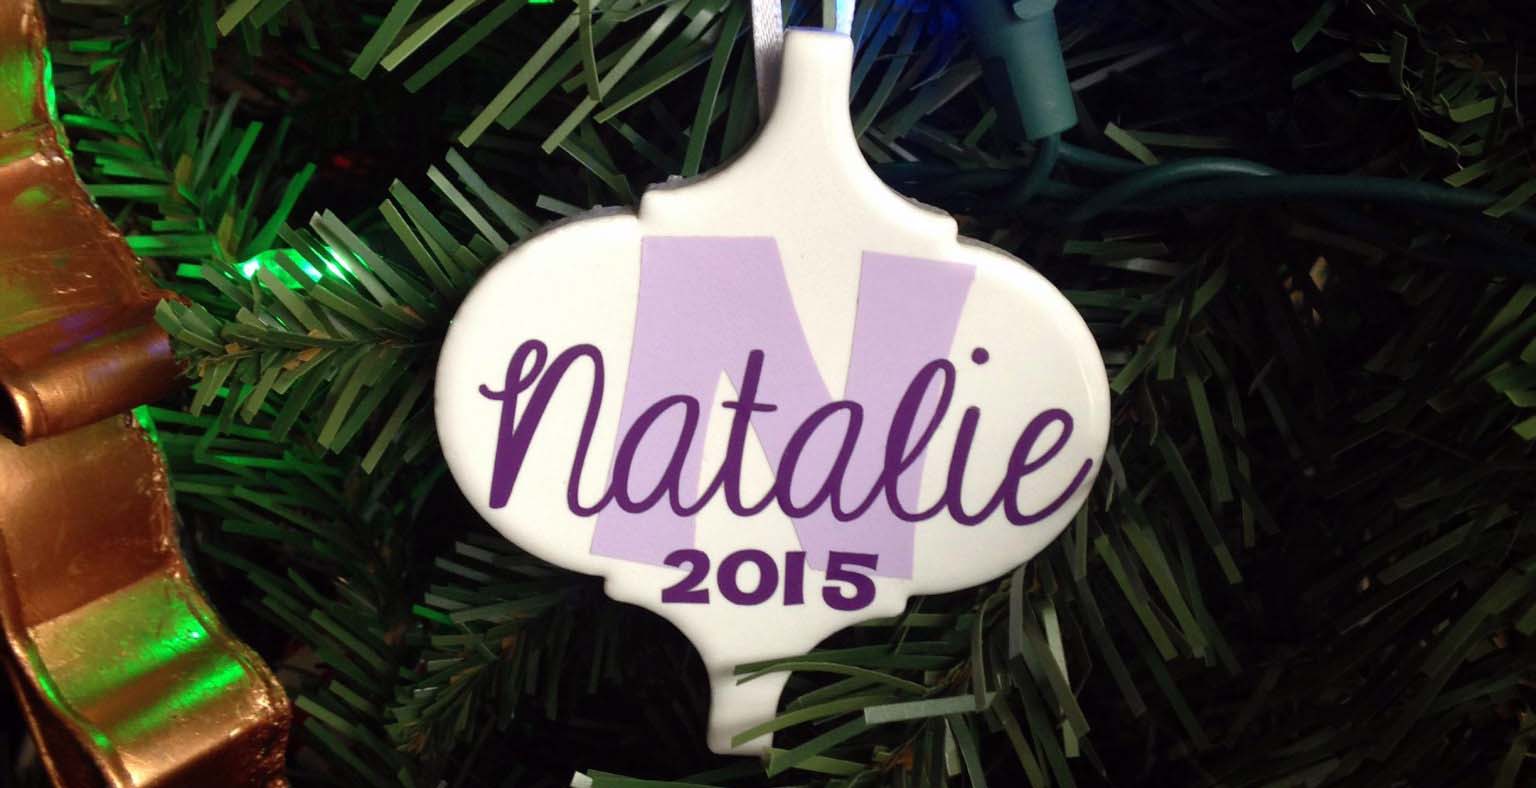 DIY Personalized Ceramic Tile Christmas Ornaments